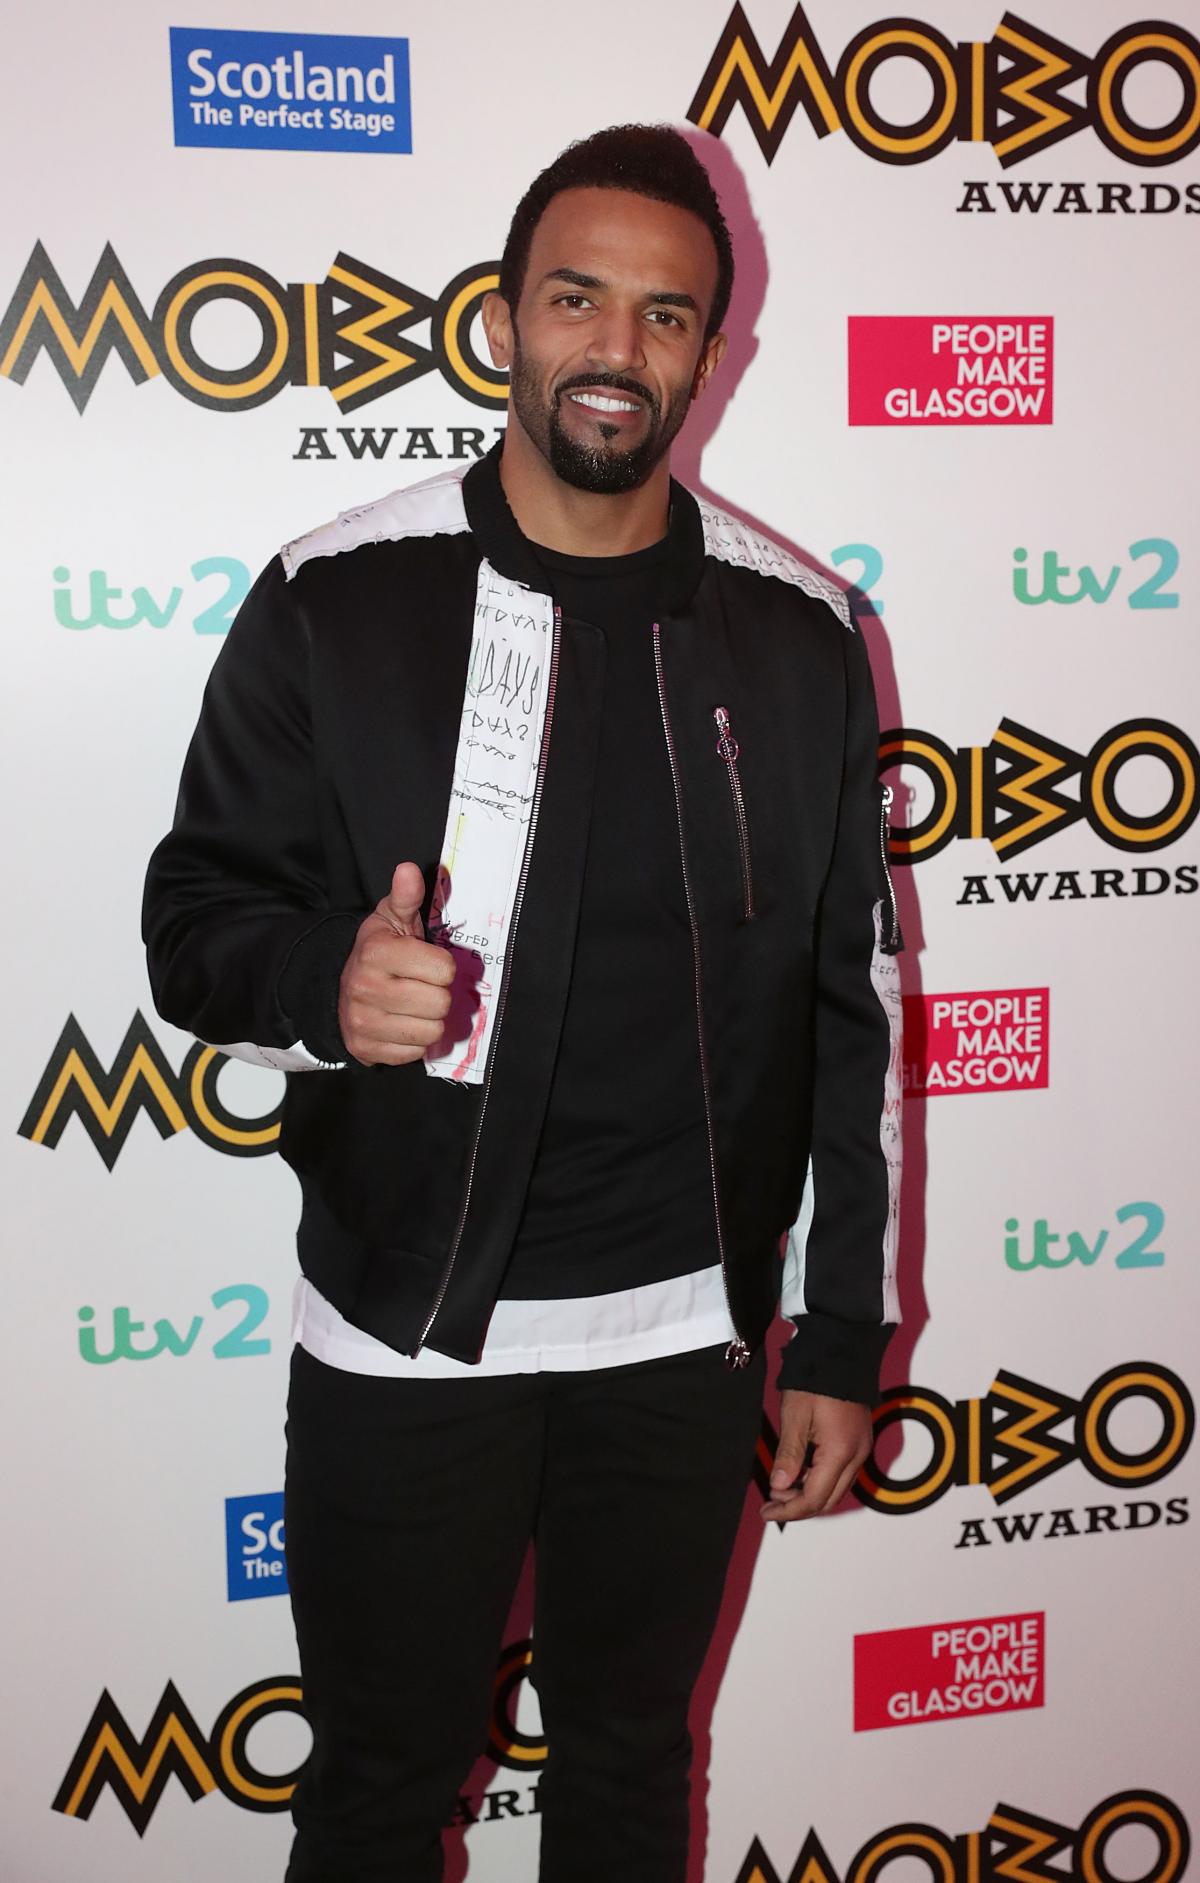 Craig at the MOBO awards in Glasgow